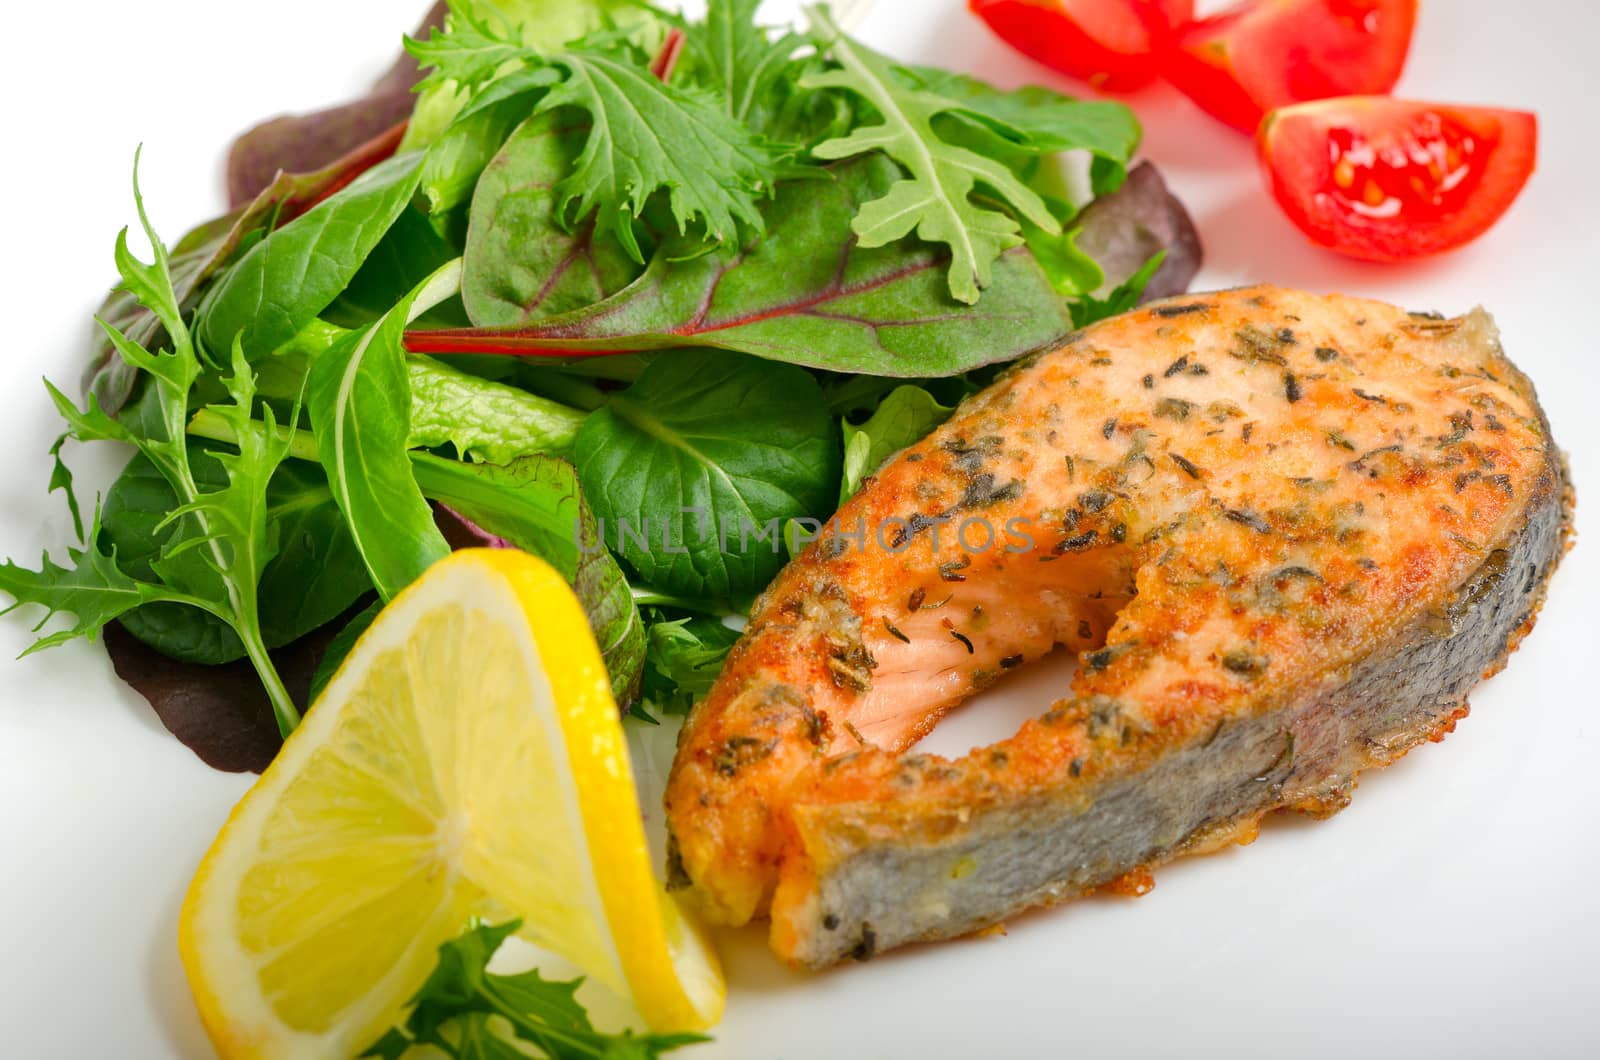 Grilled salmon with mesclun salad, cherry tomatoes and lemon